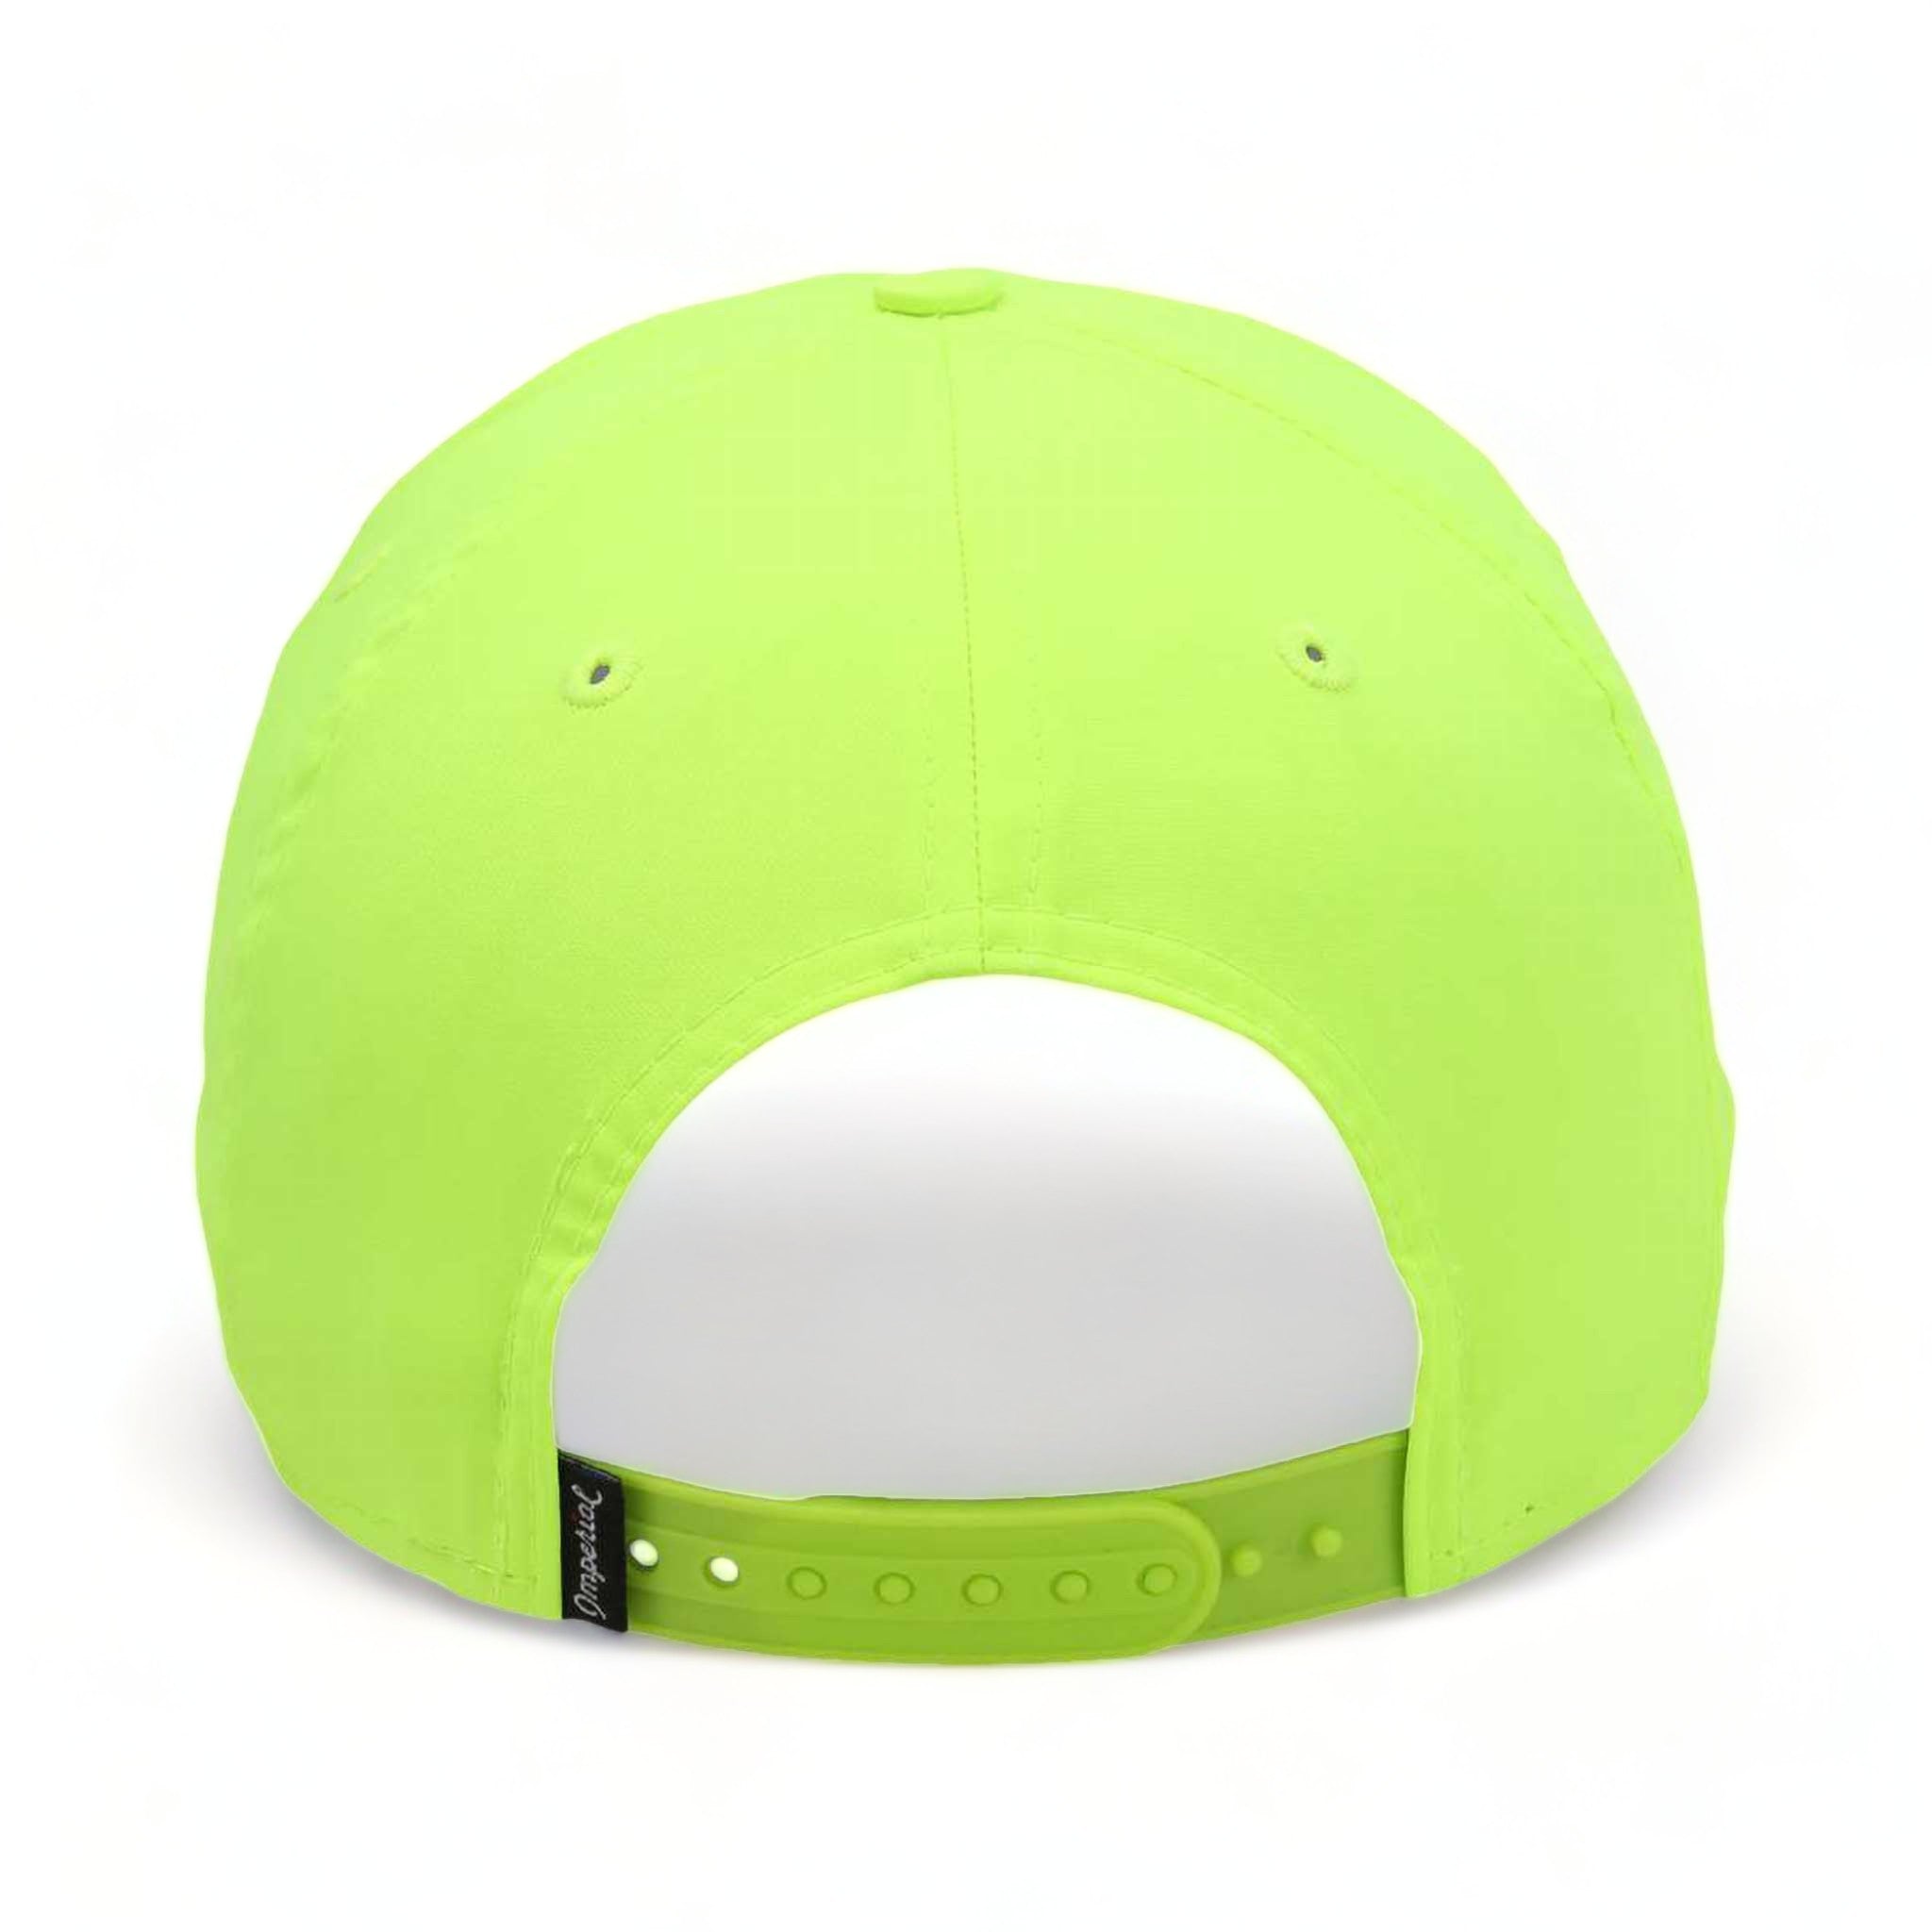 Back view of Imperial 5054 custom hat in neon yellow and white